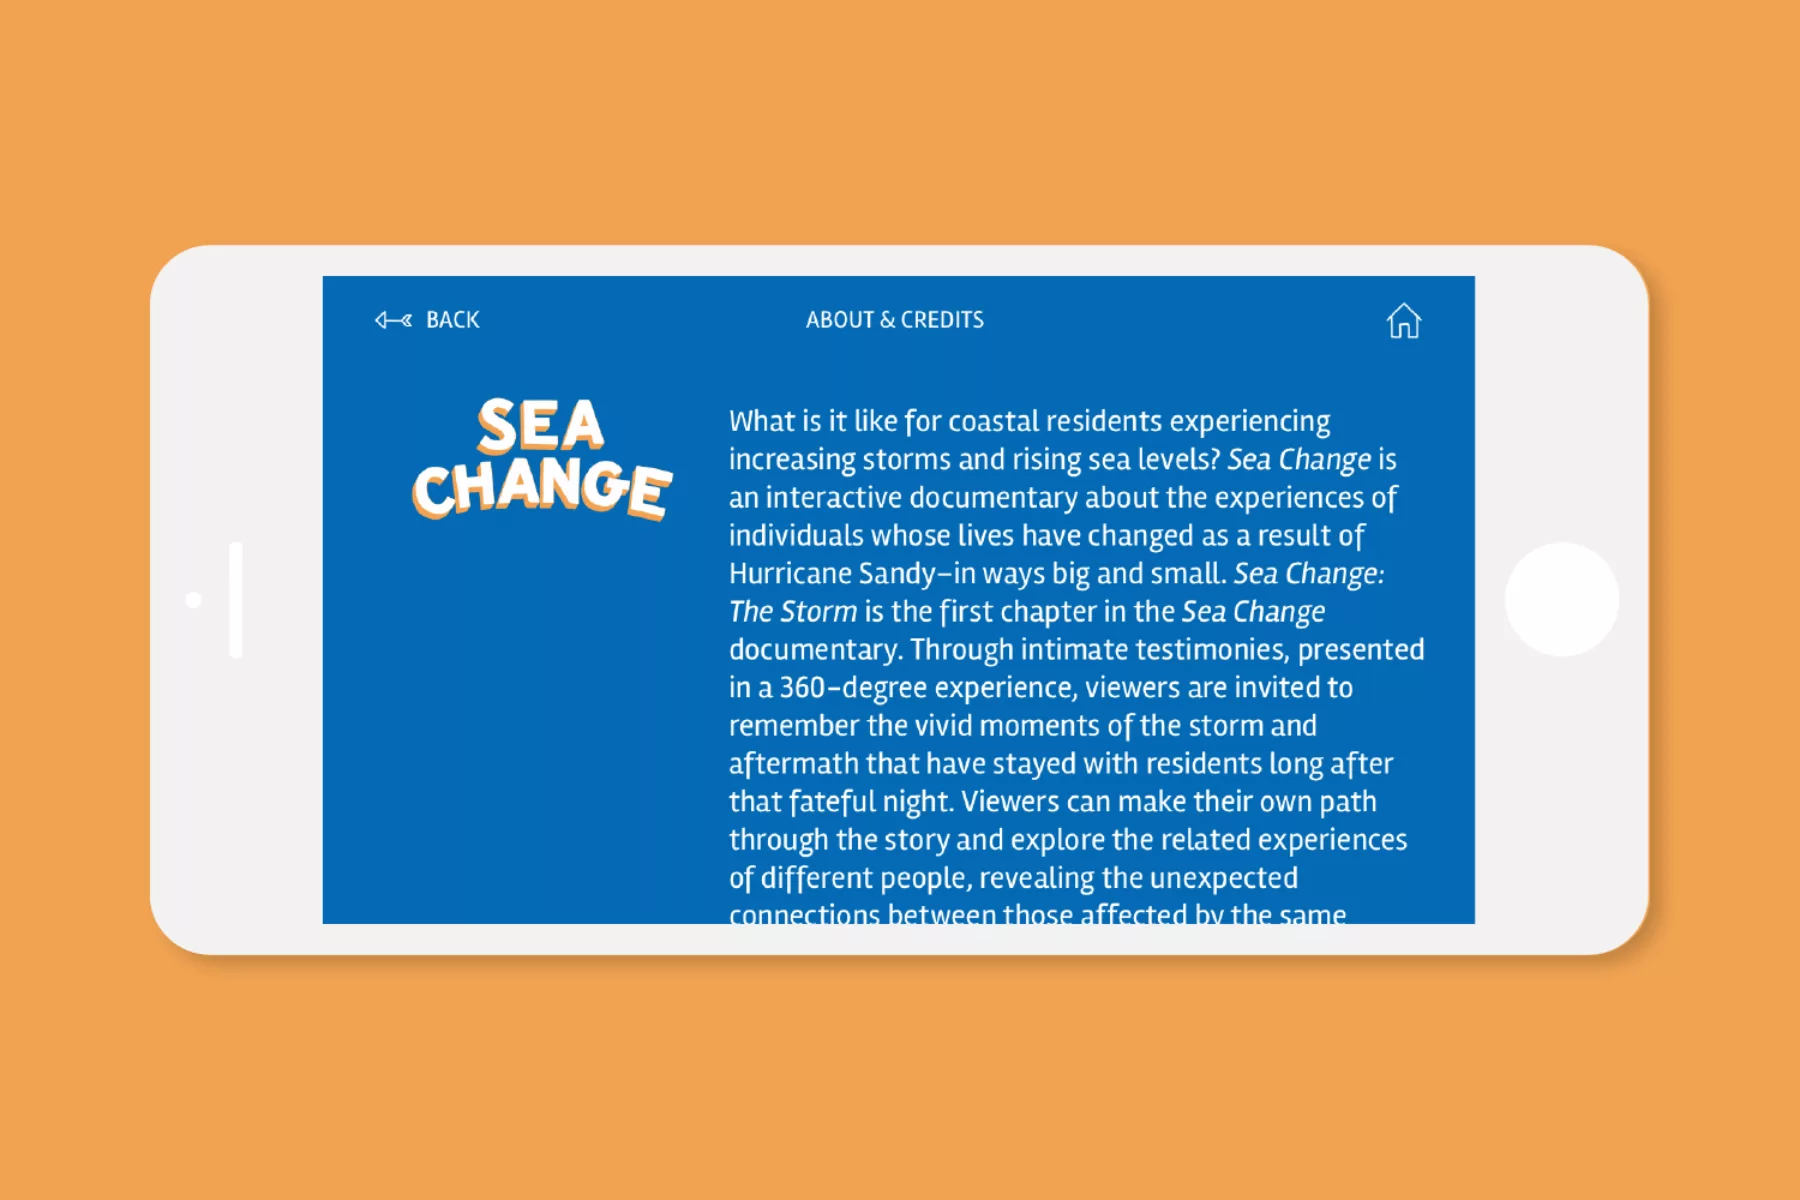 iPhone displaying About page for Sea Change experience.